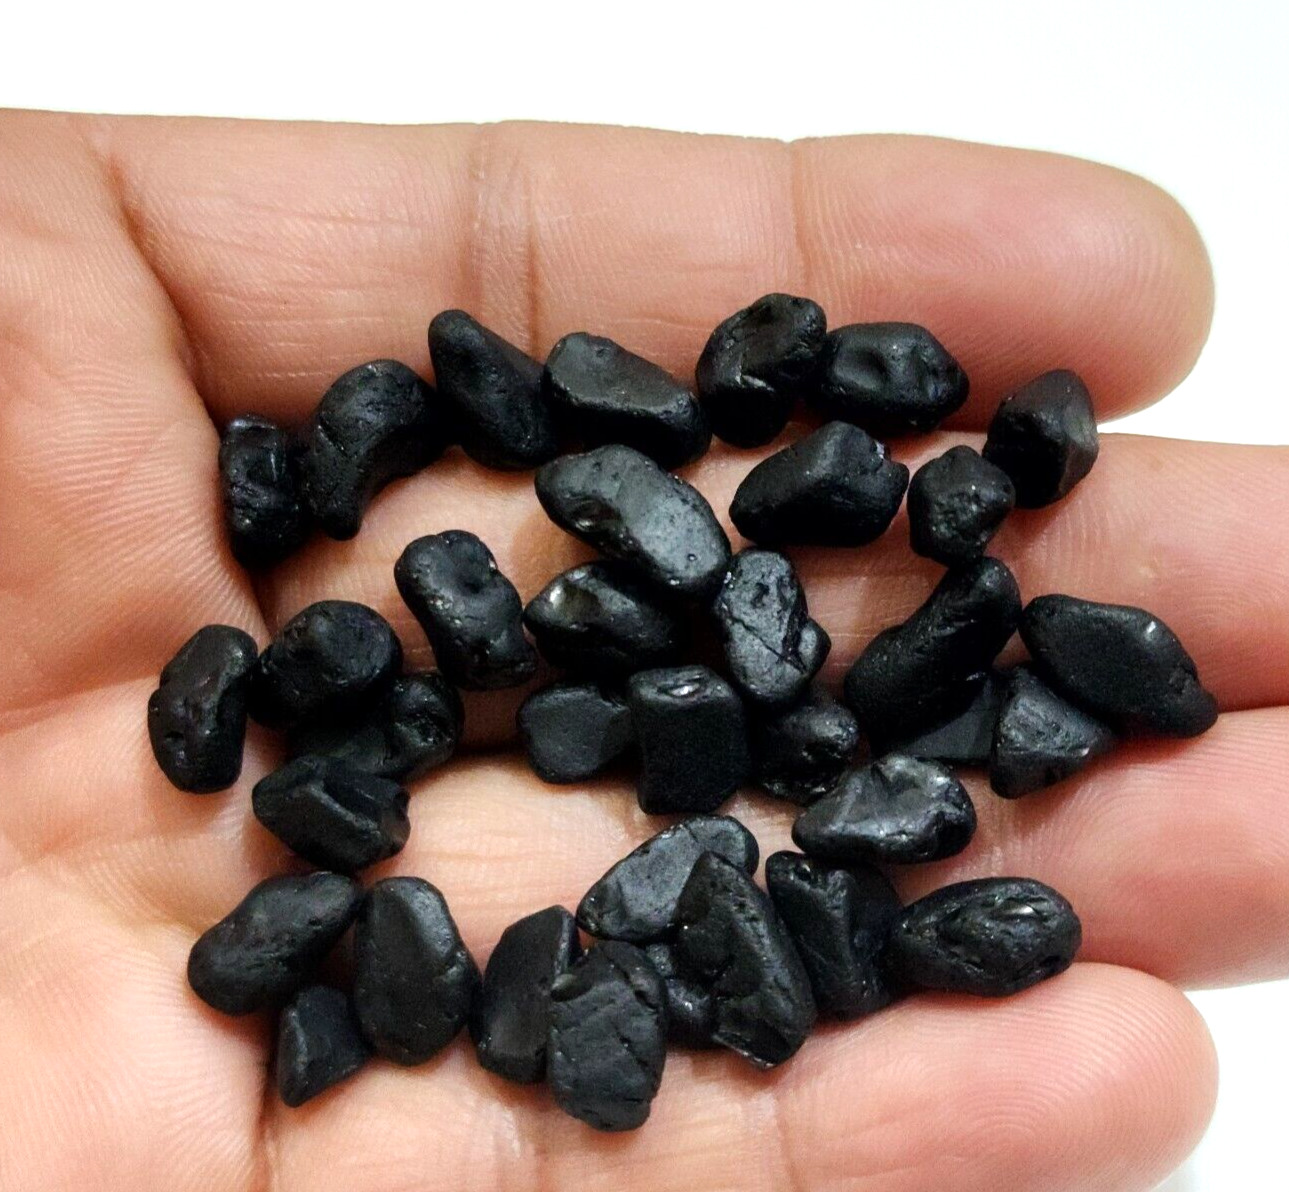 Stunning Black Spinal Rough 11-13 MM Size 35 Pcs Loose Gemstone For Jewelry